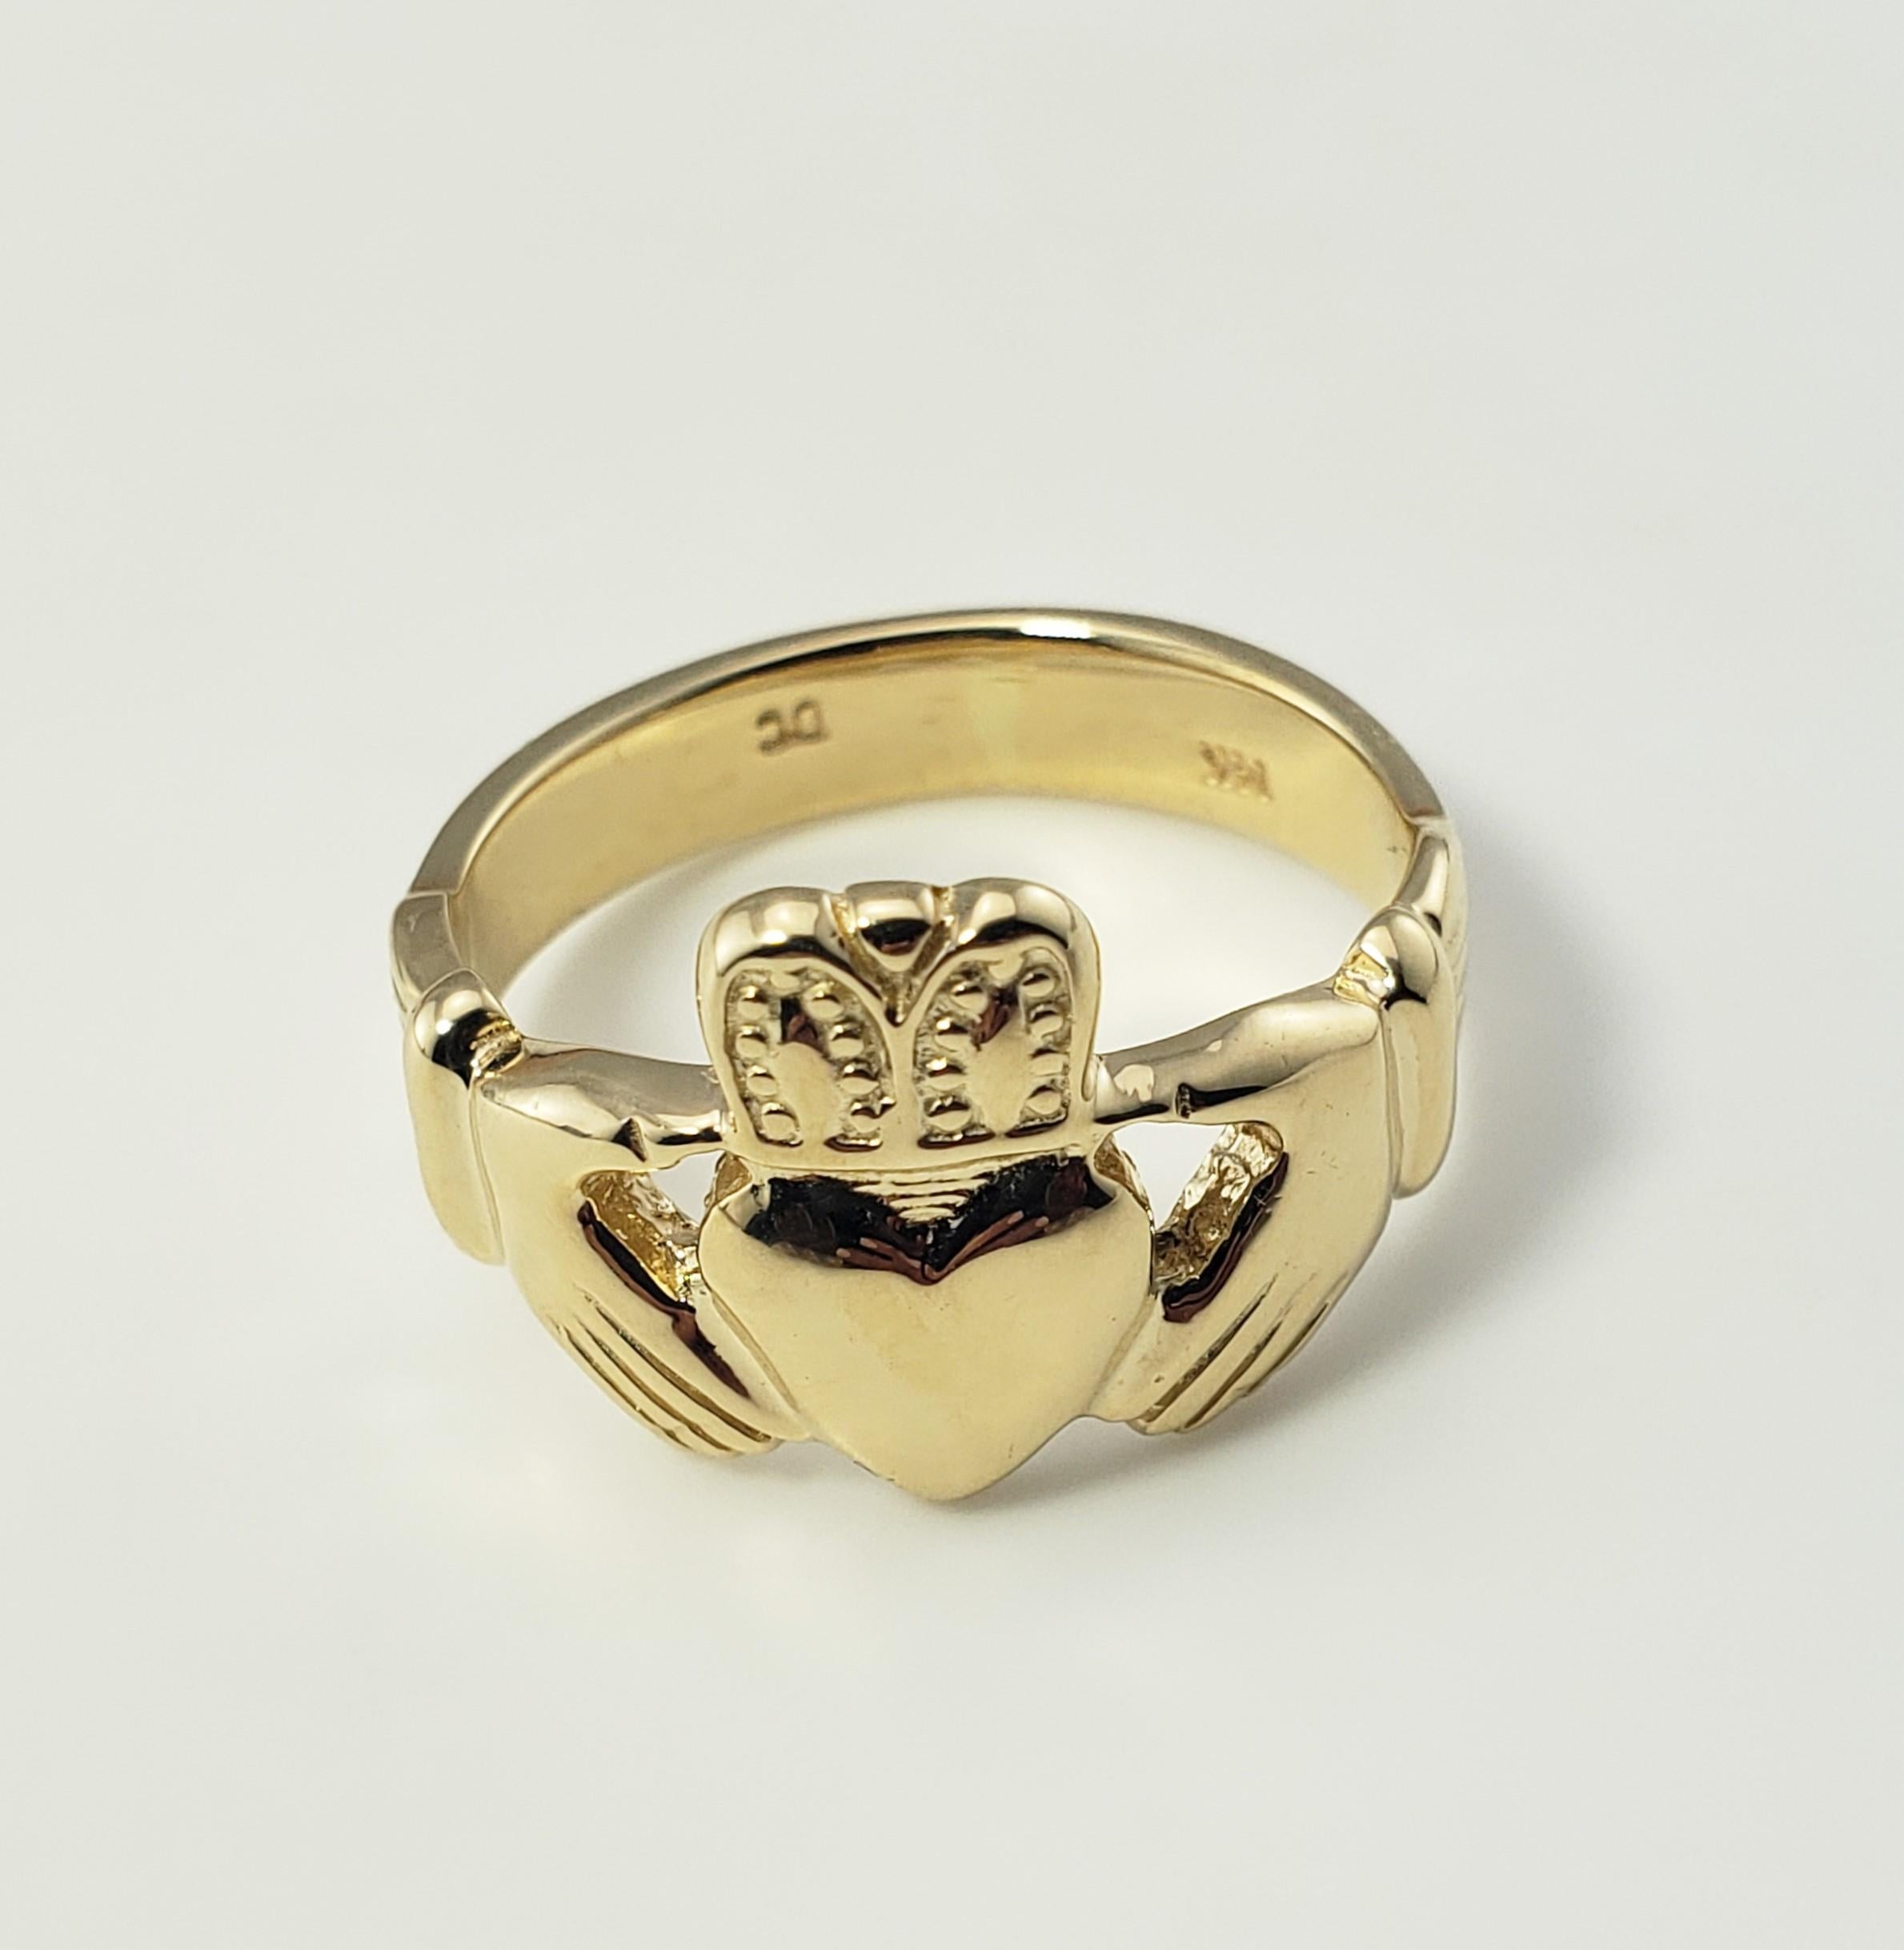 14 Karat Yellow Gold Claddagh Ring Size 7.75-

The traditional Irish Claddagh ring is a symbol of friendship, love, and loyalty.  Beautifully detailed in 14K yellow gold.  Width:  13 mm
Shank 4 mm.

Size: 7.75

Weight:  4.1 dwt. / 6.5 gr.

Stamped: